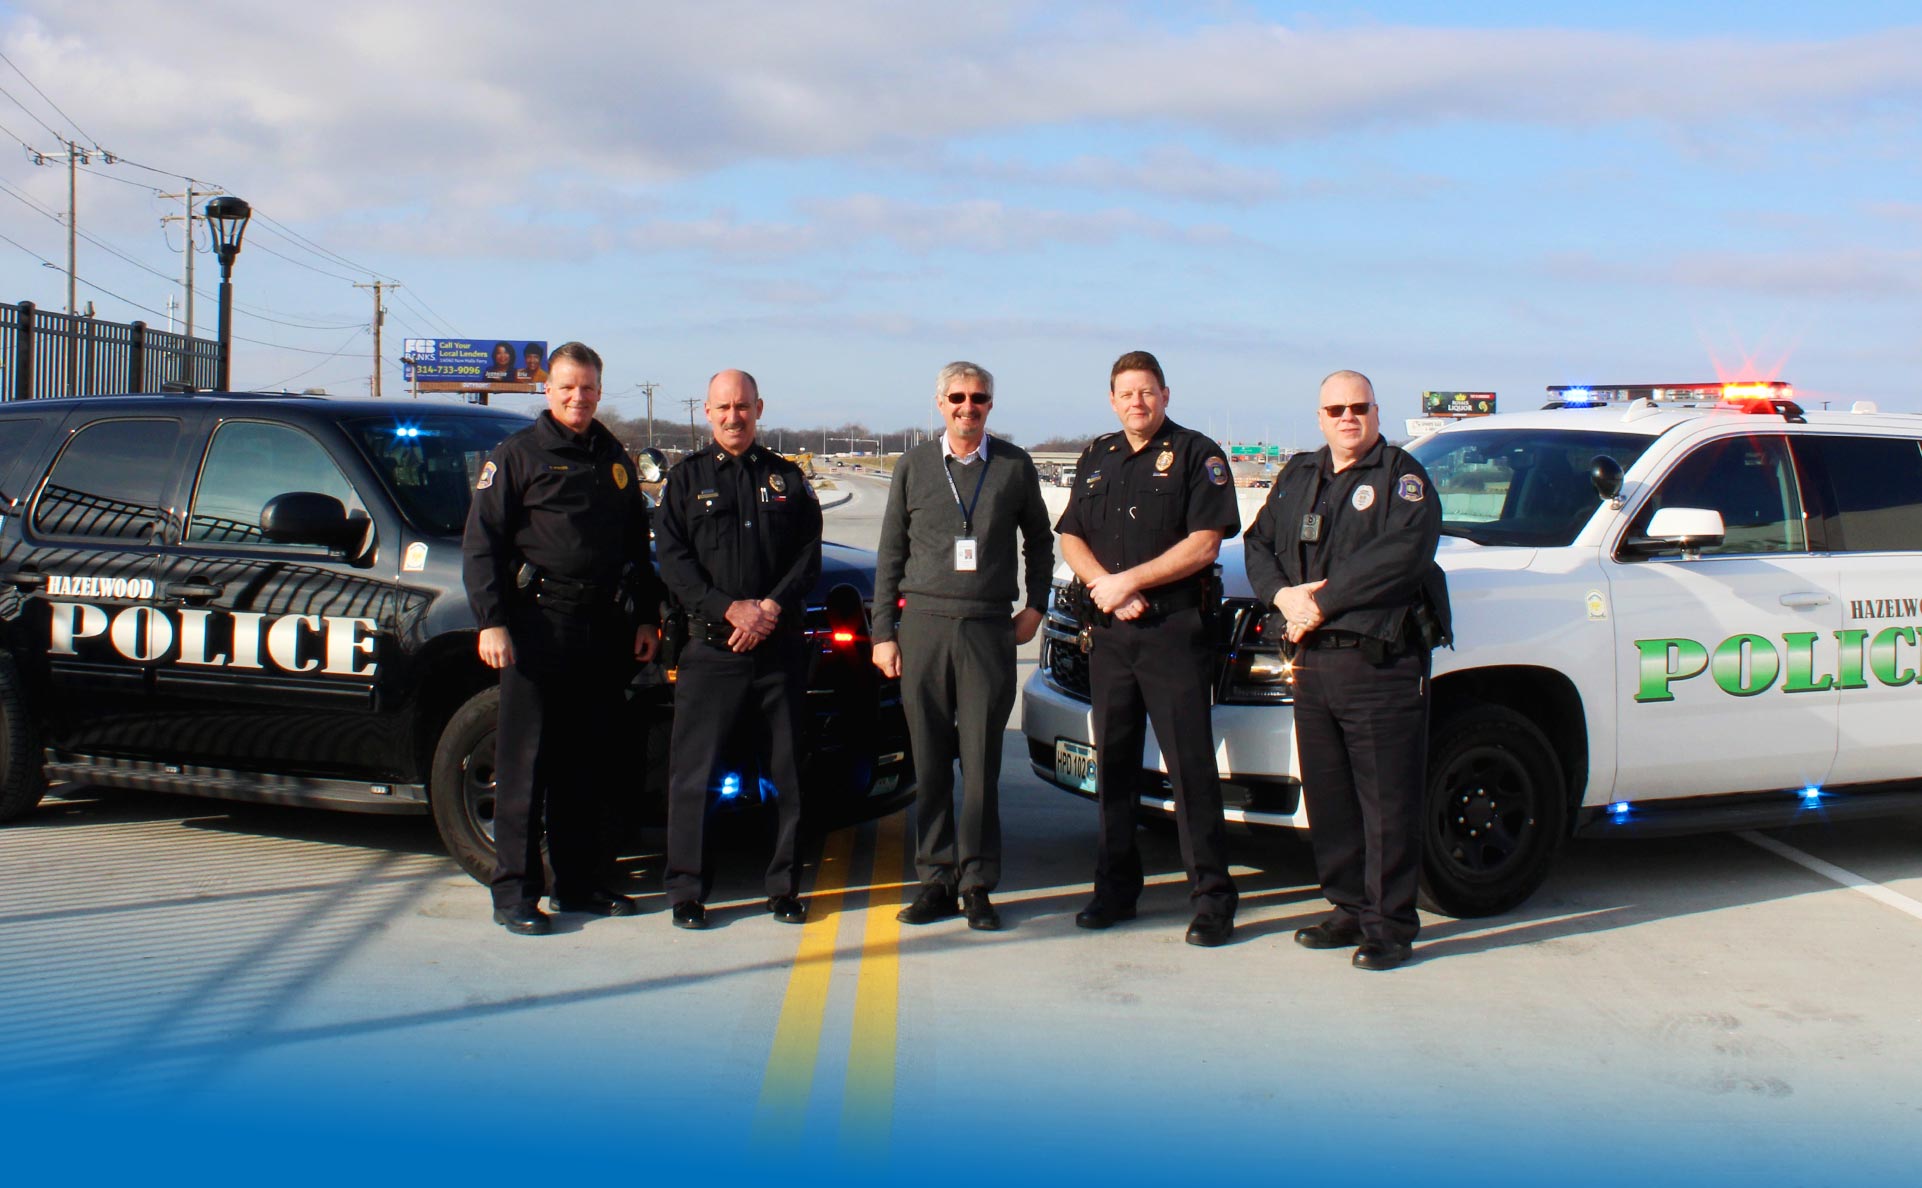 Four police officers and a community leader standing on a newly built bridge in front of two police sport utility vehicles with the words Hazelwood Police along the sides.